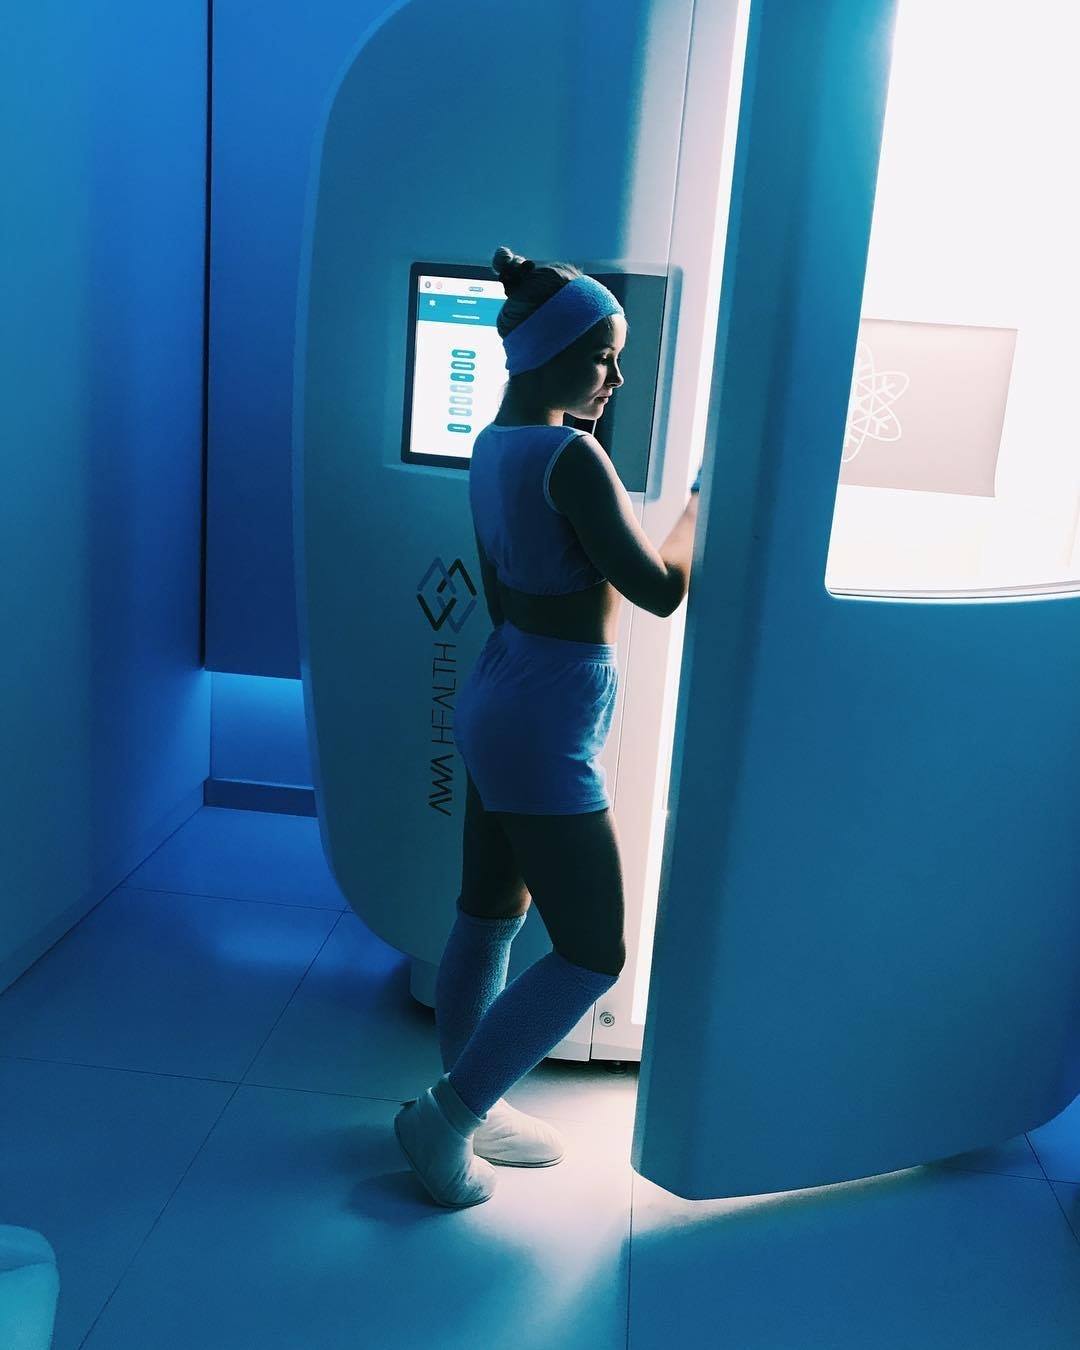 Cryotherapy: The Cool, New Treatment In Dubai That Lets You 'Chill Out'